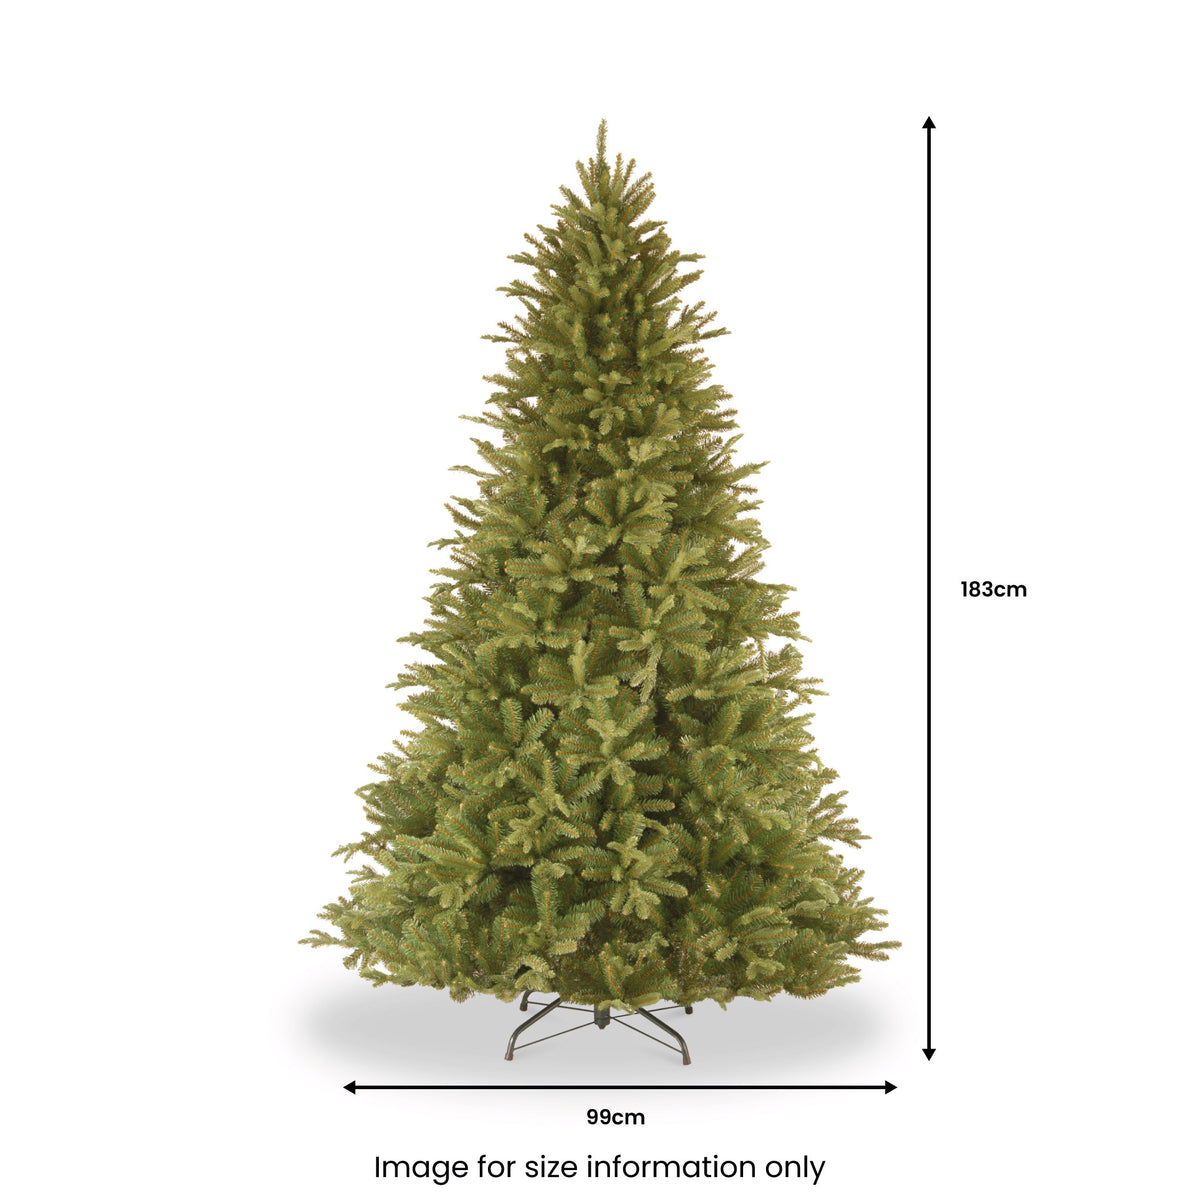 Tiffany Fir 6ft Christmas Tree from Roseland